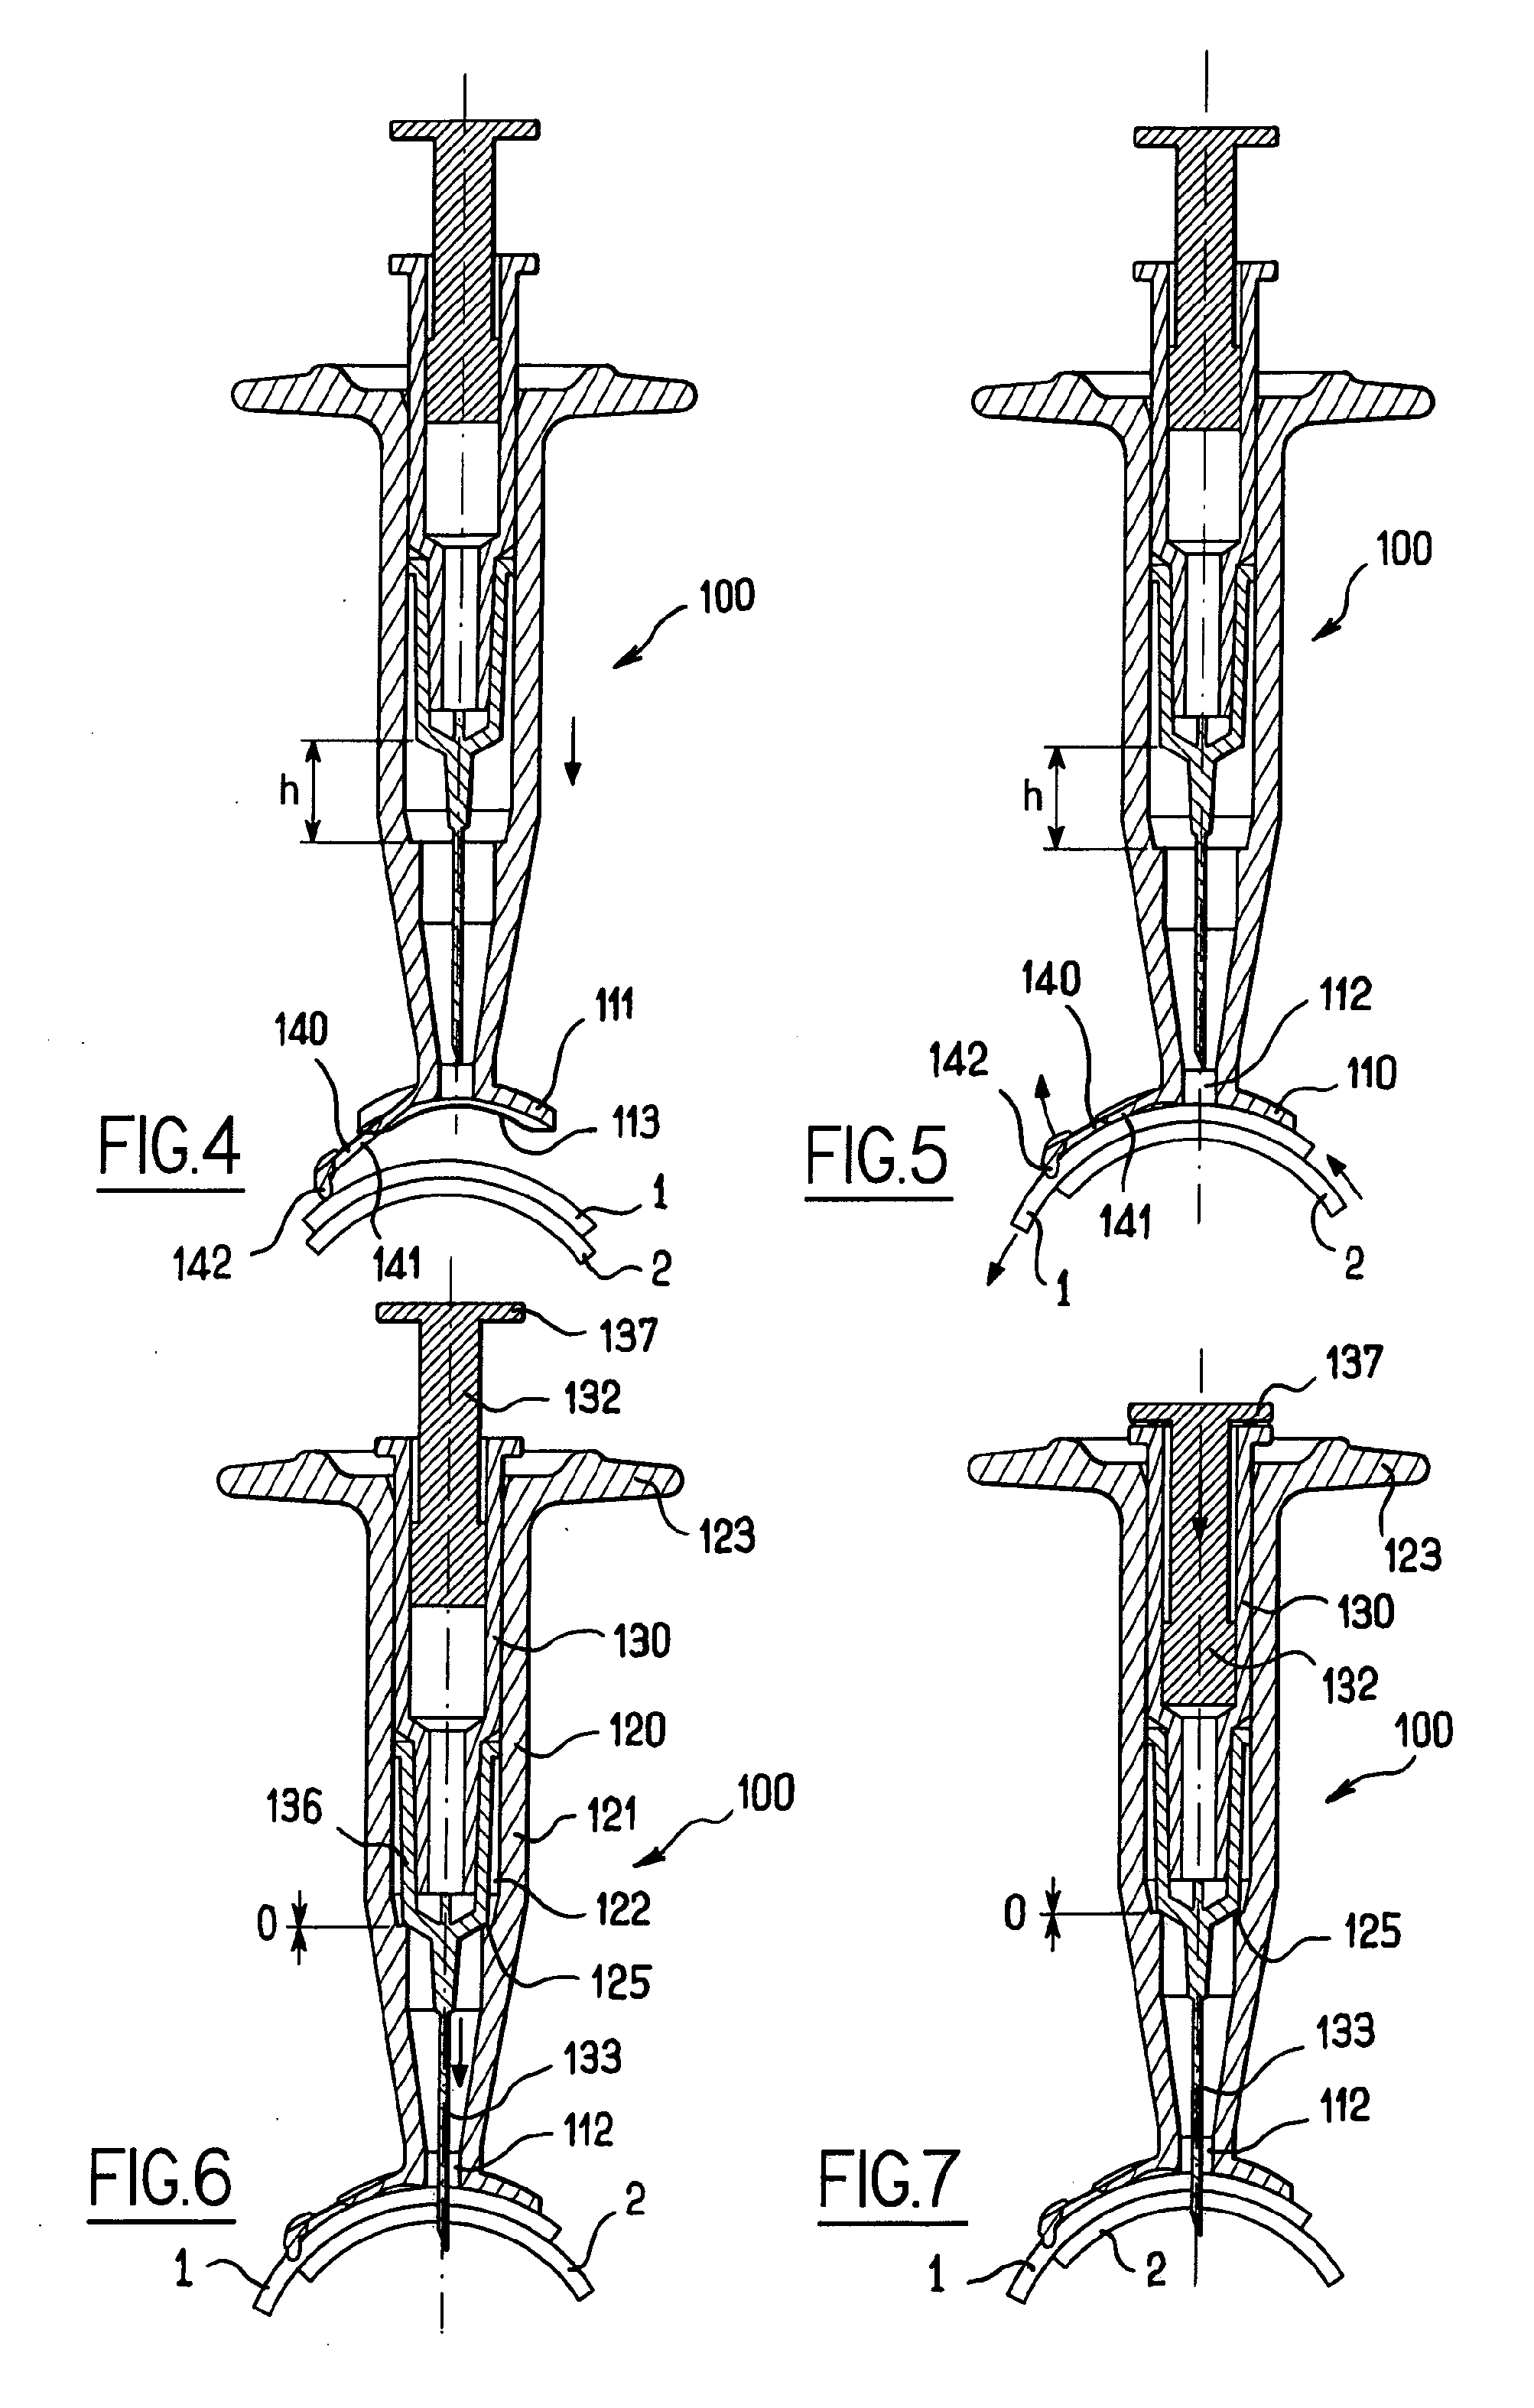 Apparatus for intra-ocular injection